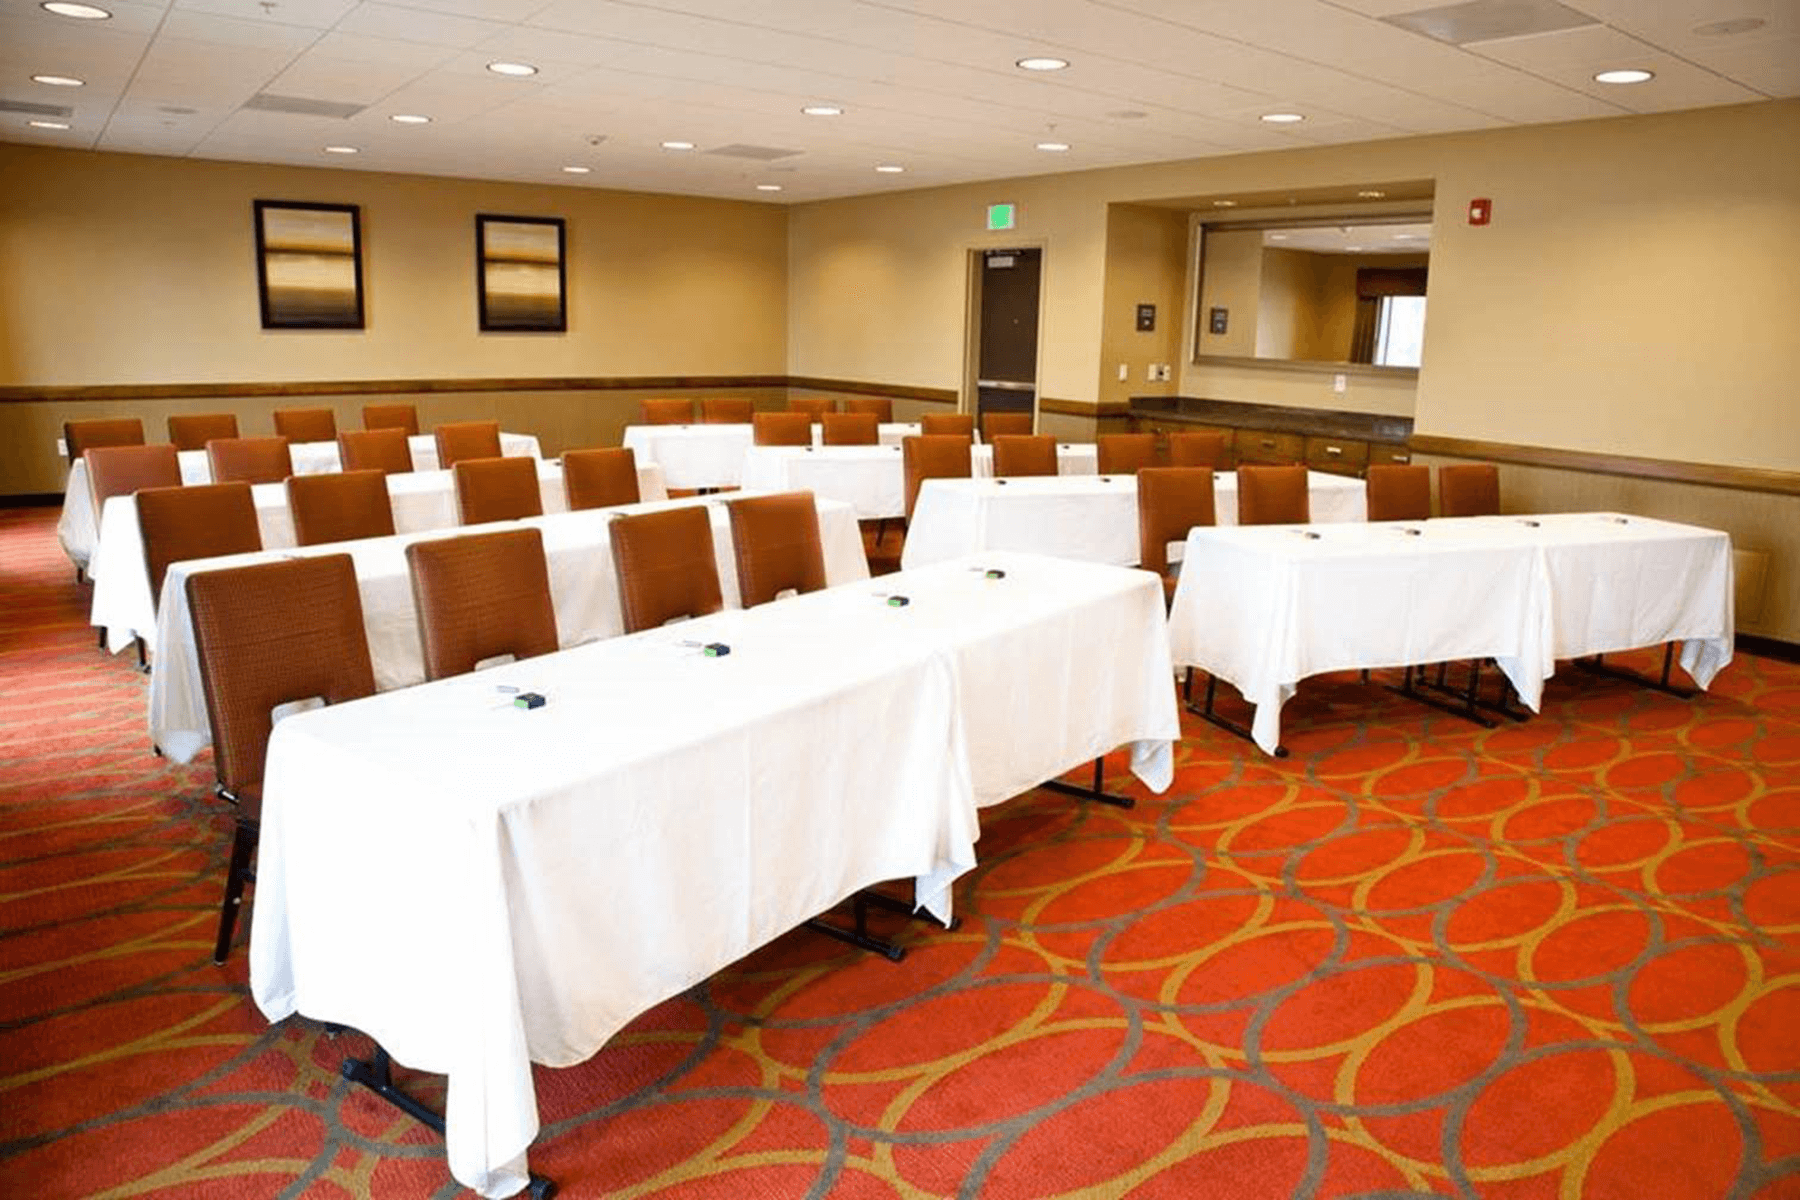  Hampton Inn and Suites Salinas meeting room interior with linen covered banquet tables 